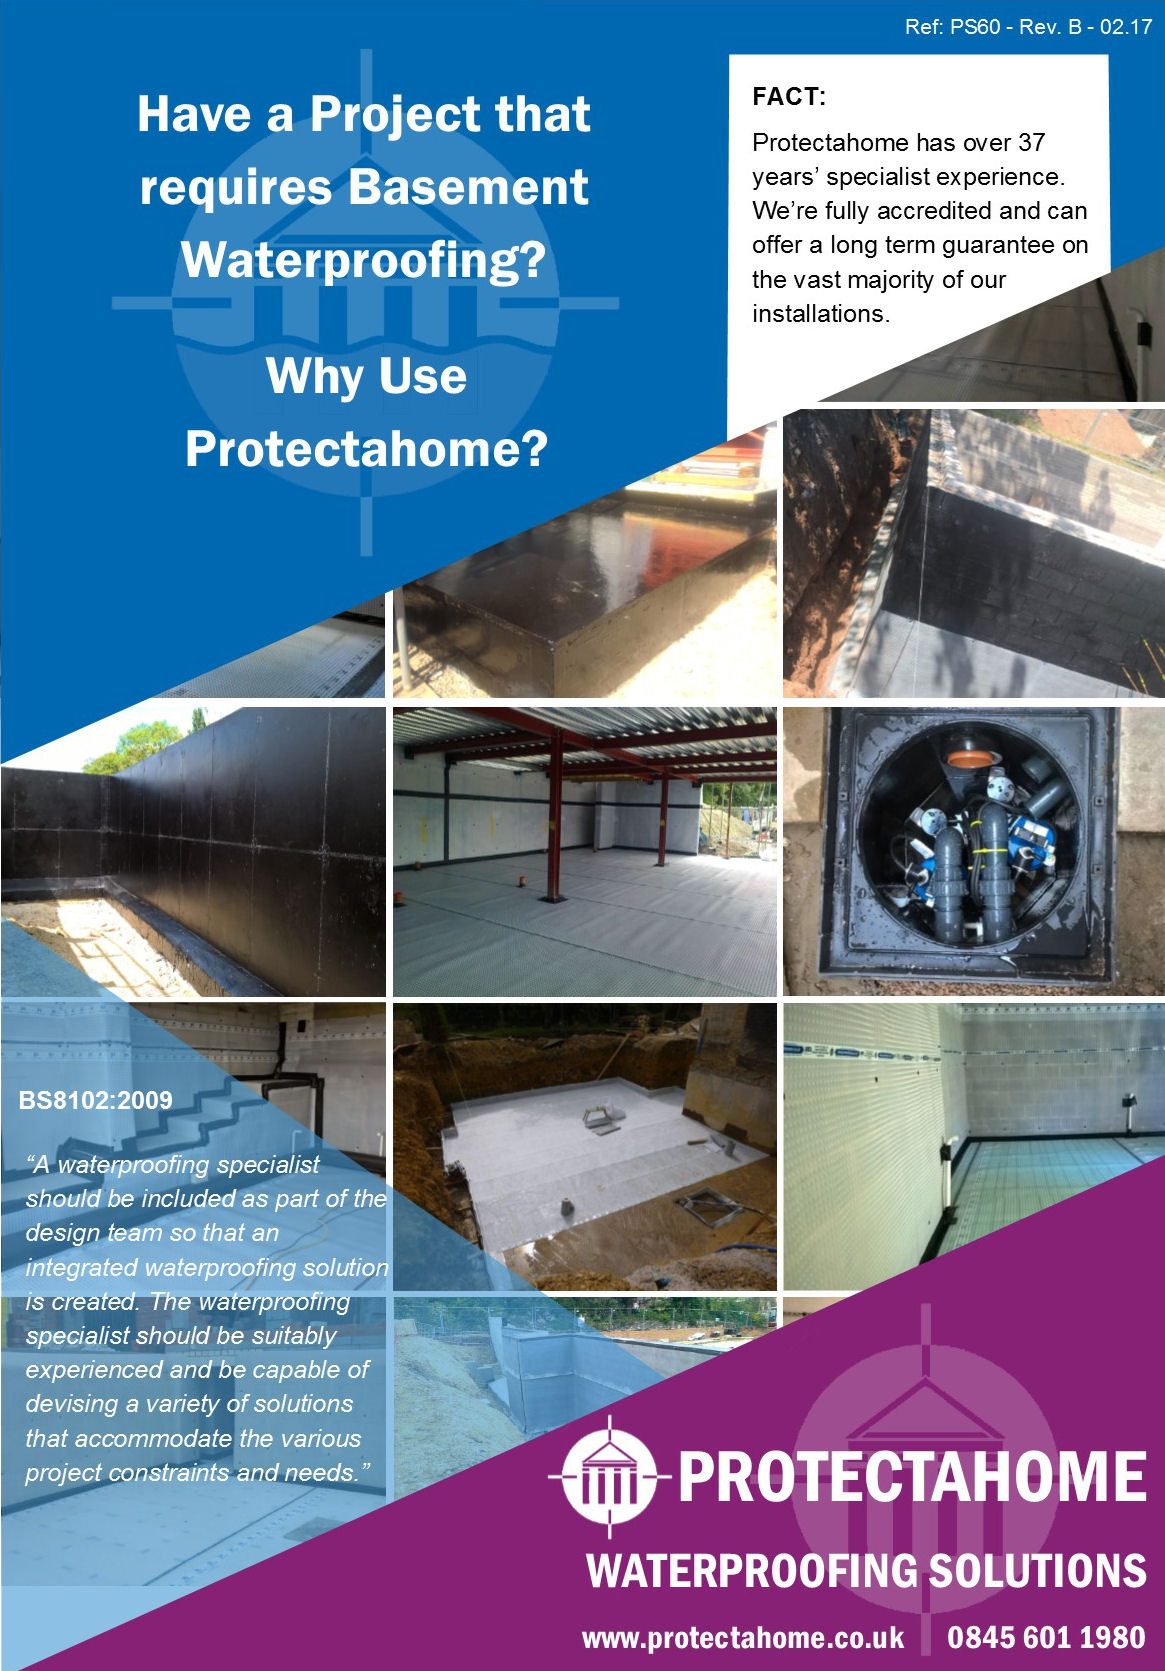 Basement Waterproofing, Why Use Protectahome